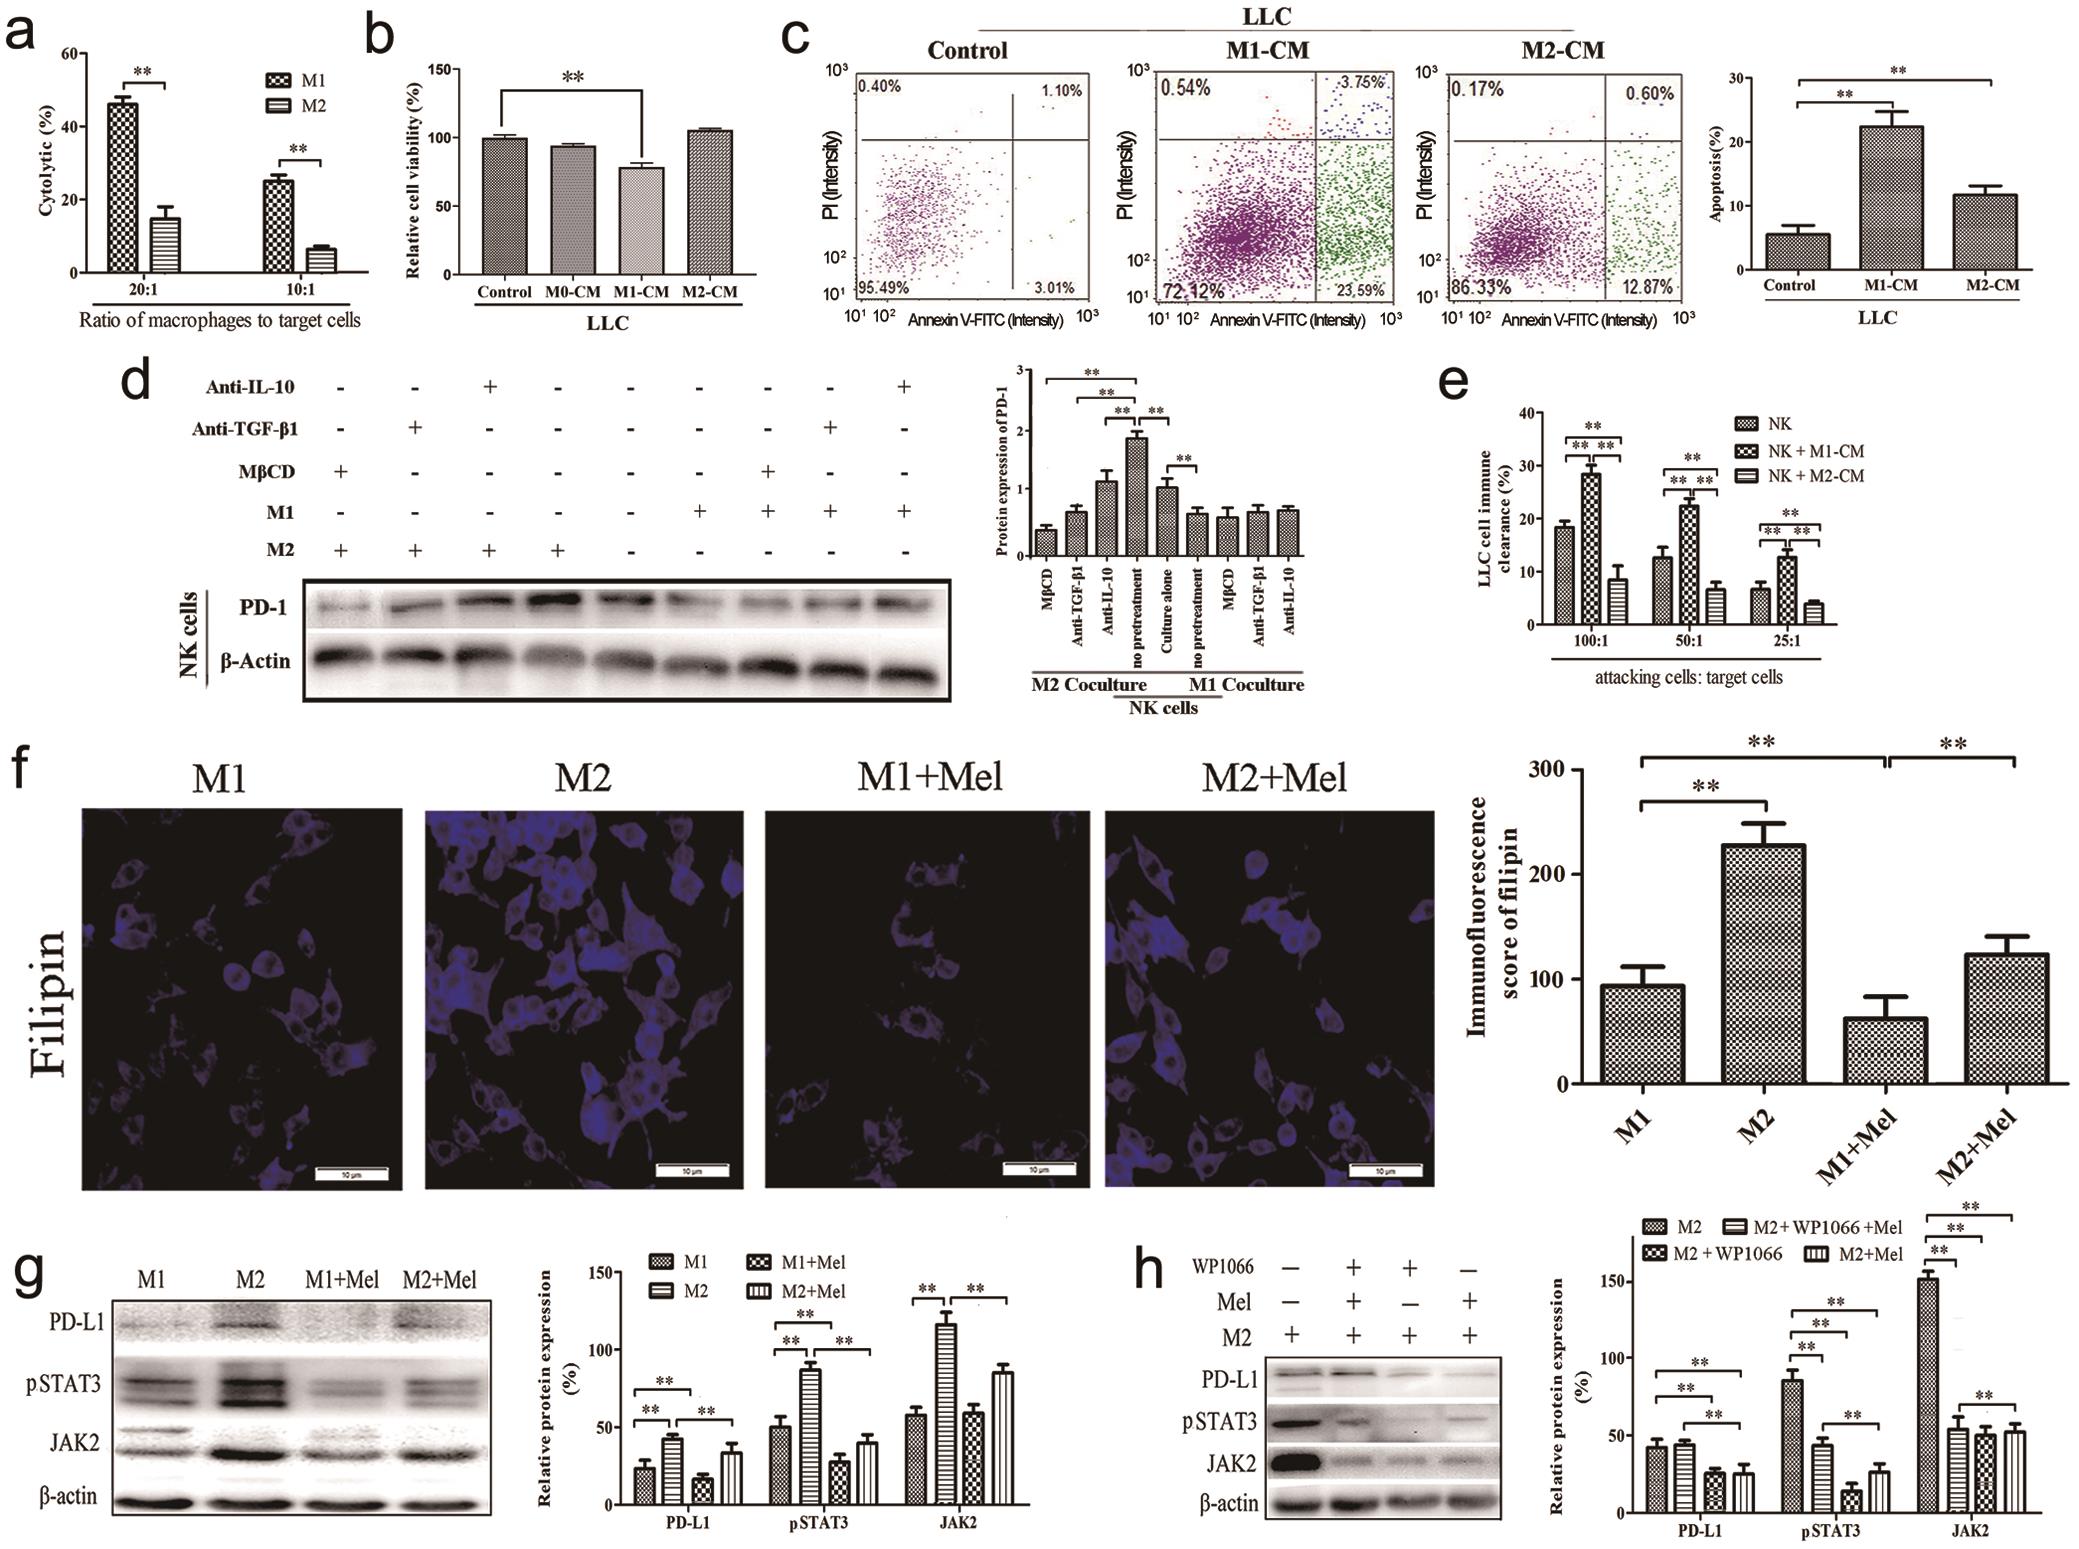 M1-like and M2-like macrophages had different effects on LLC cells and NK cells.